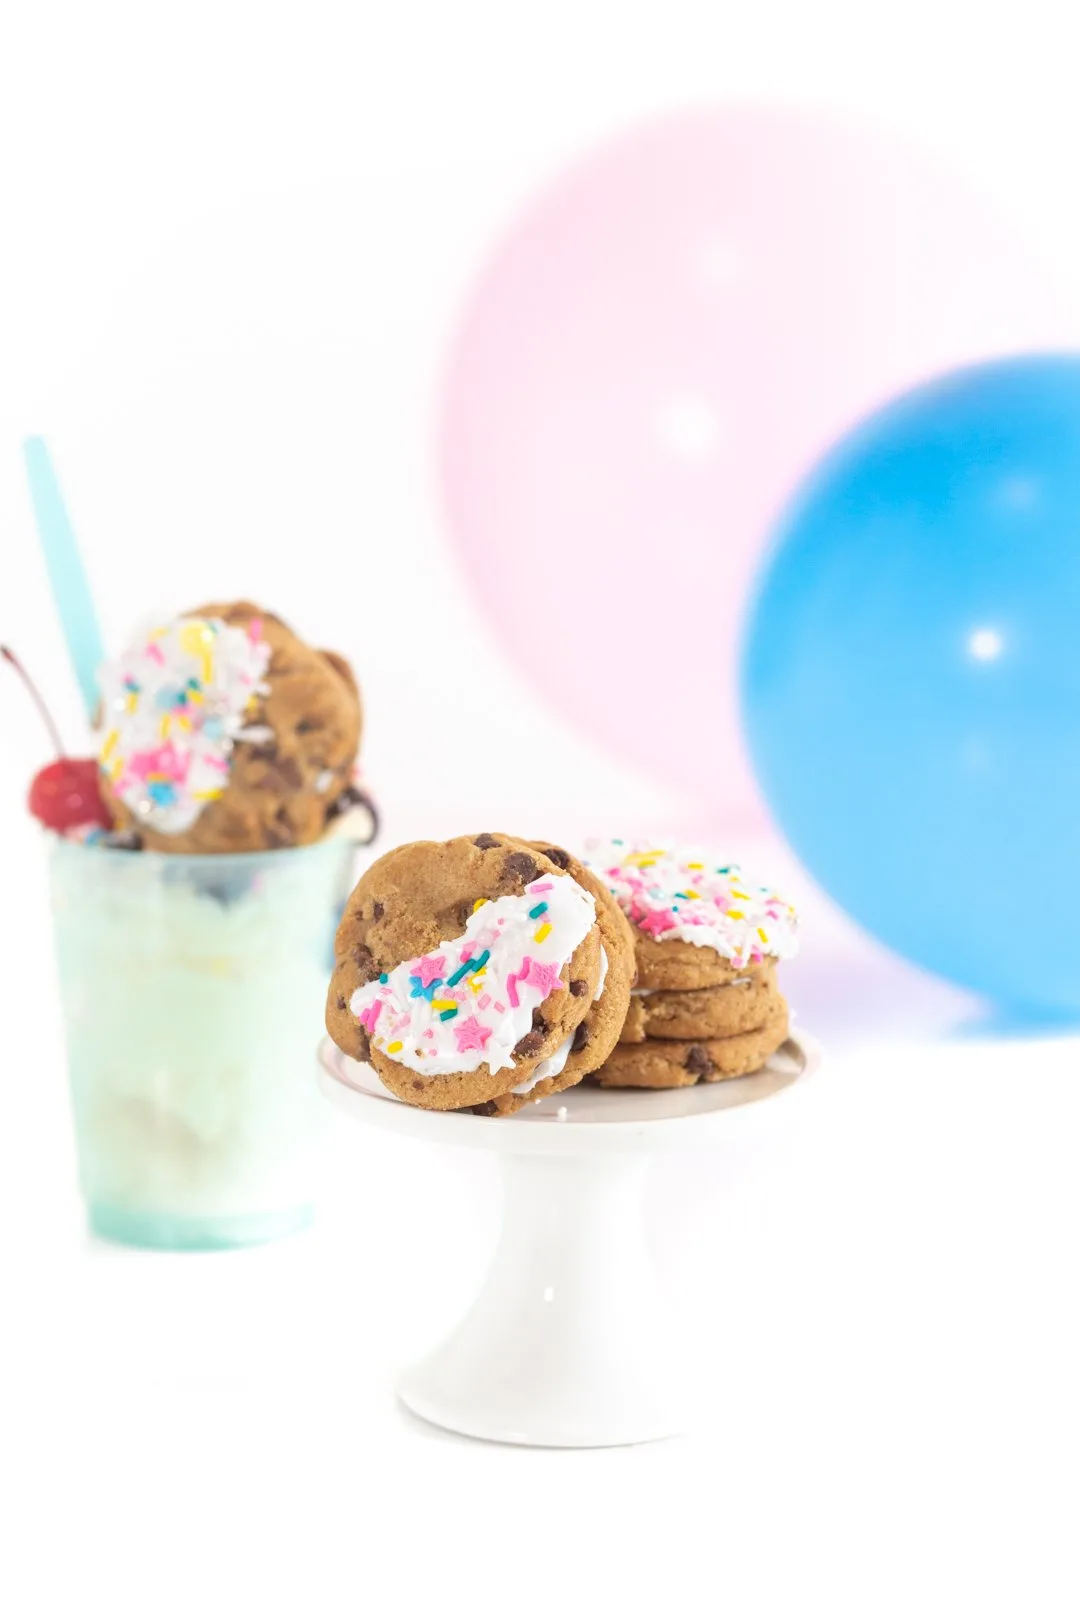 pinata cookies with sprinkles inside that are perfect for eating with ice cream sundaes